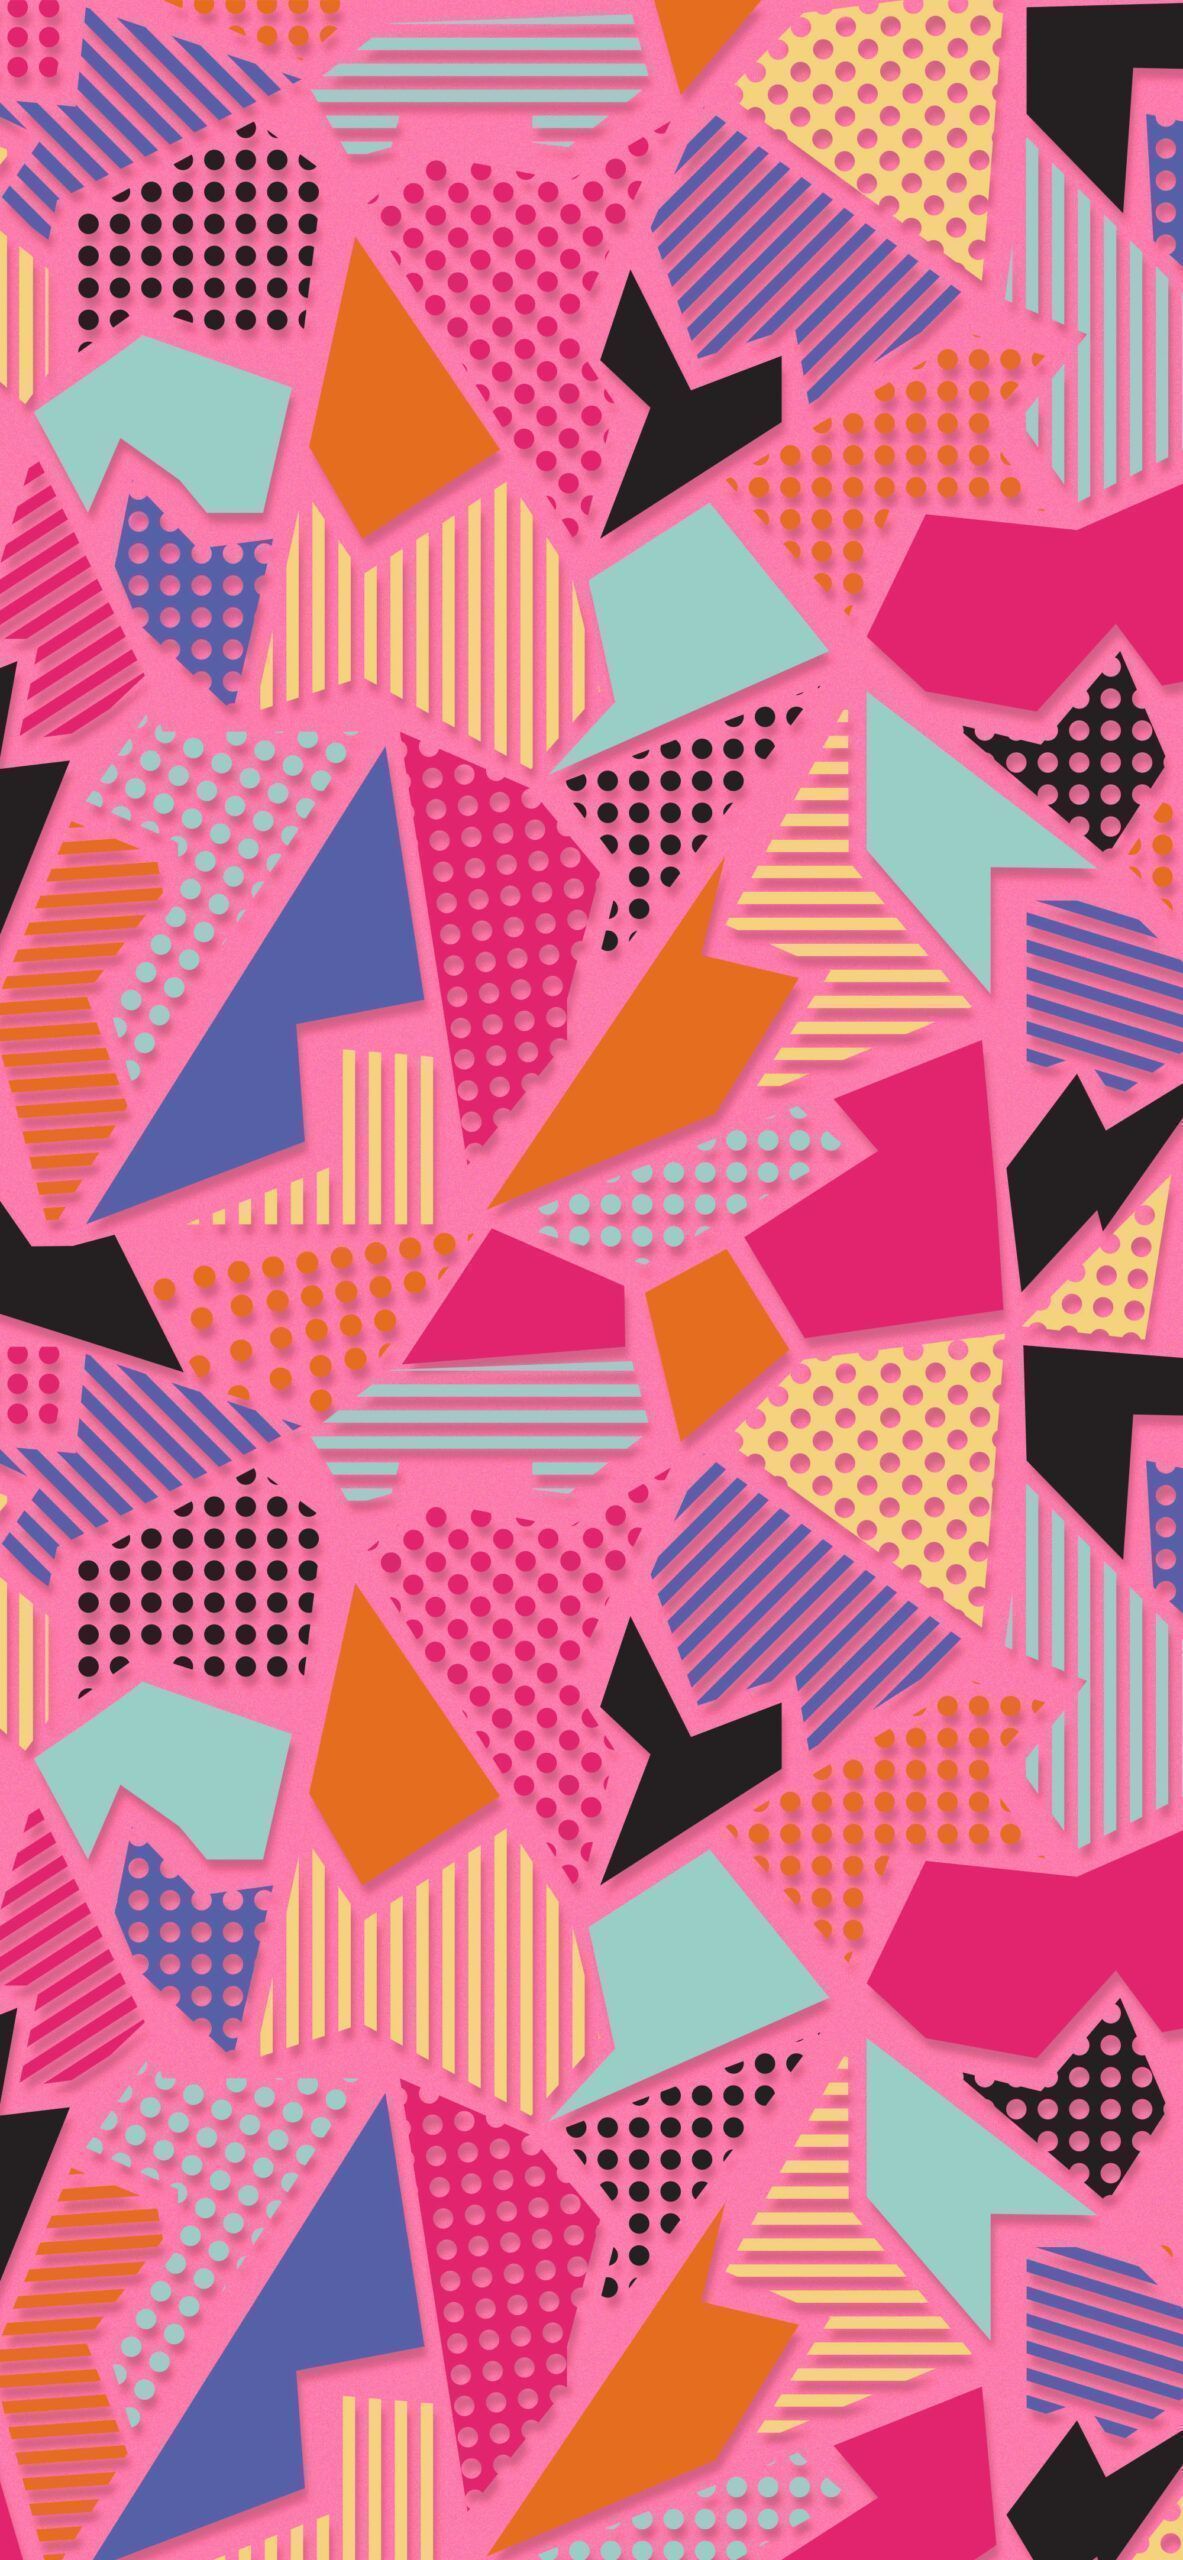 Abstract Wallpaper with Geometric Forms